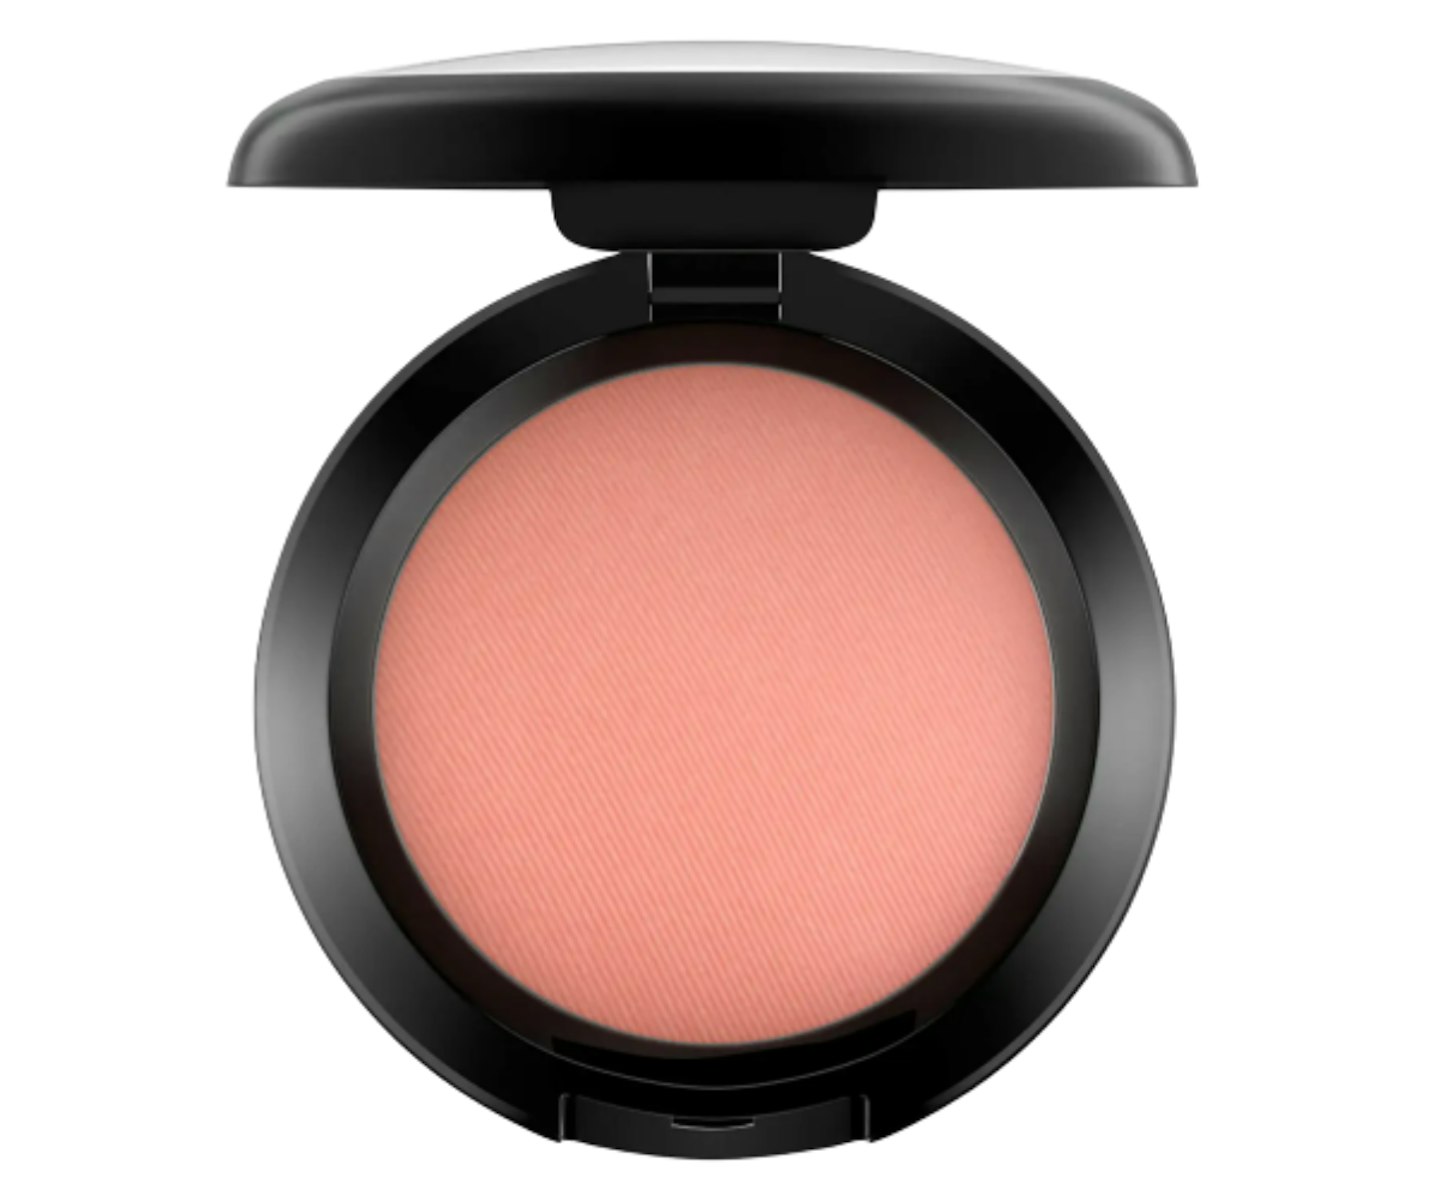 A picture of the MAC Peaches Blush